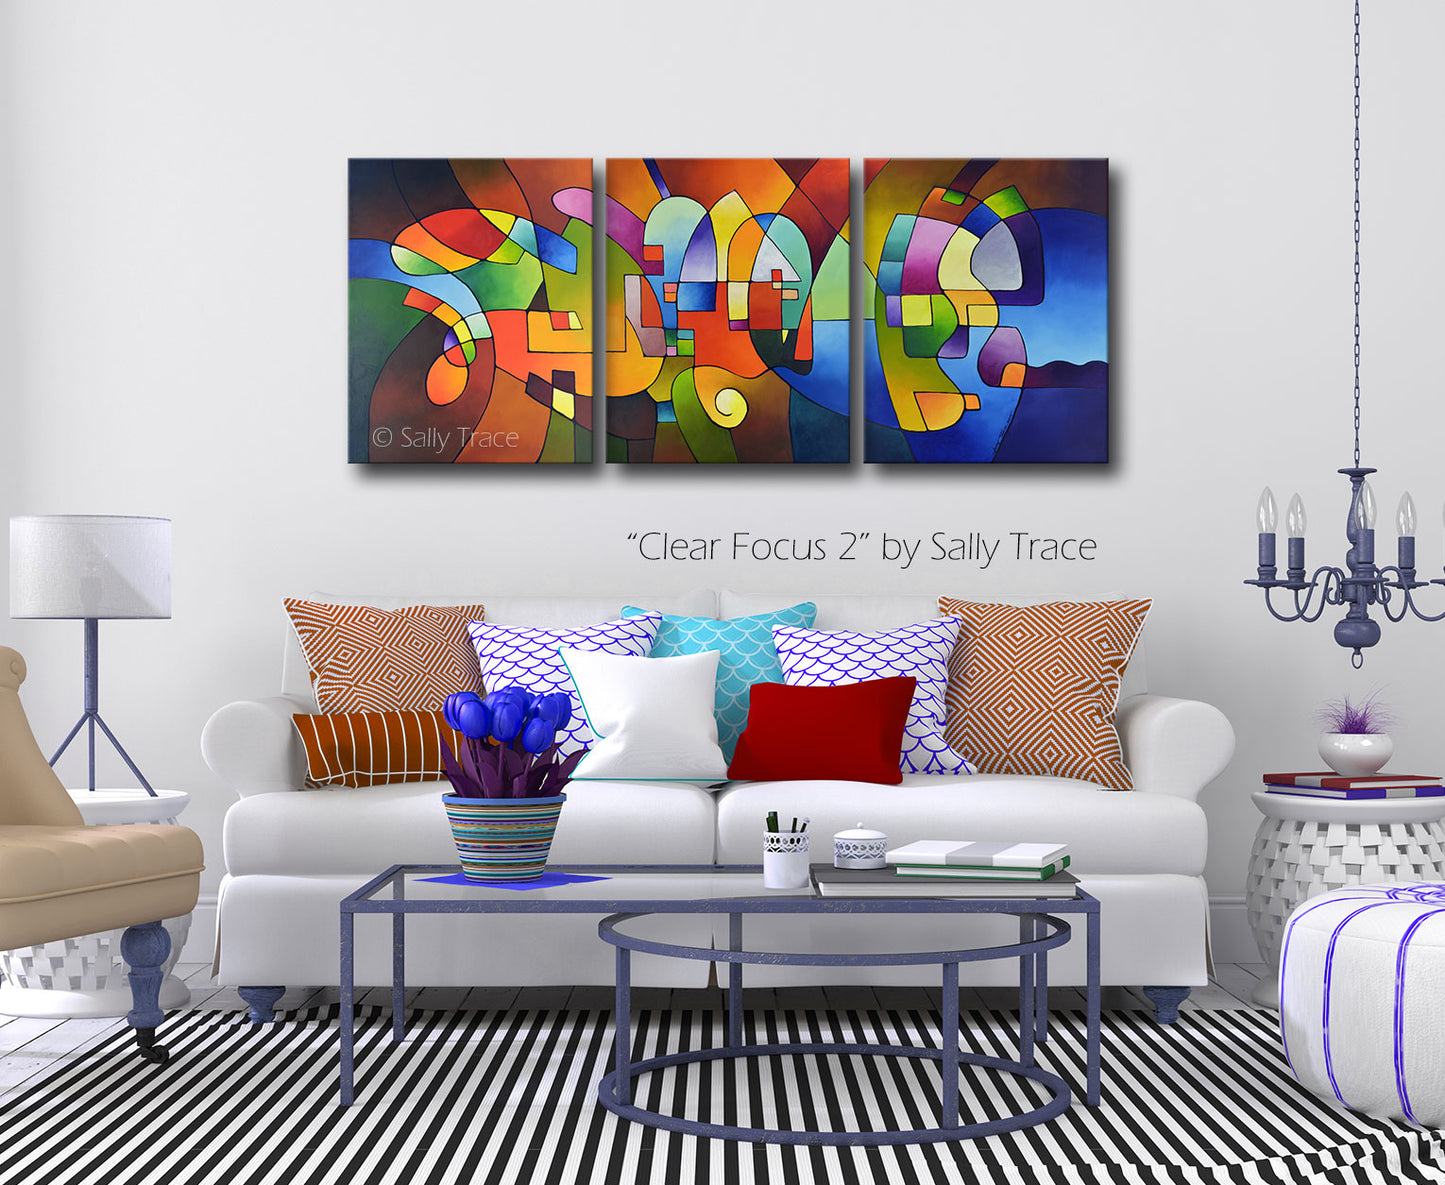 "Clear Focus 2" triptych geometric painting by Sally Trace, in a living room